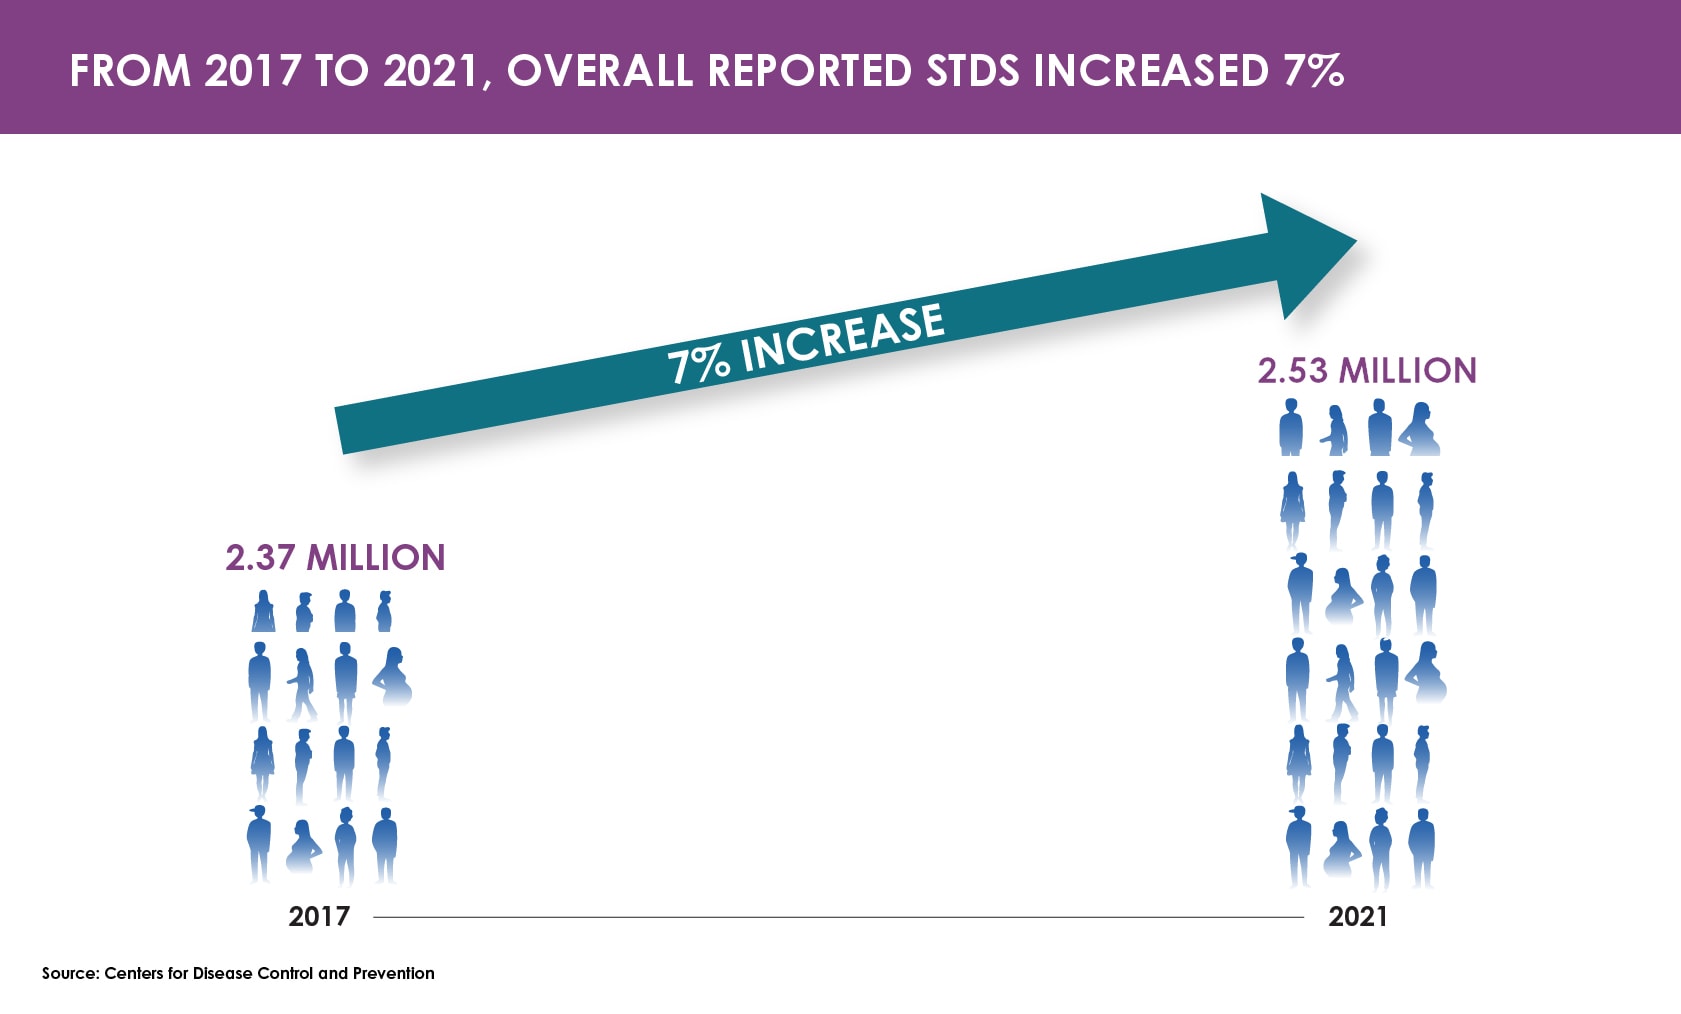 A bar chart showing a 7% increase in reported STDs between 2017 and 2021, from 2.37 million to 2.53 million.